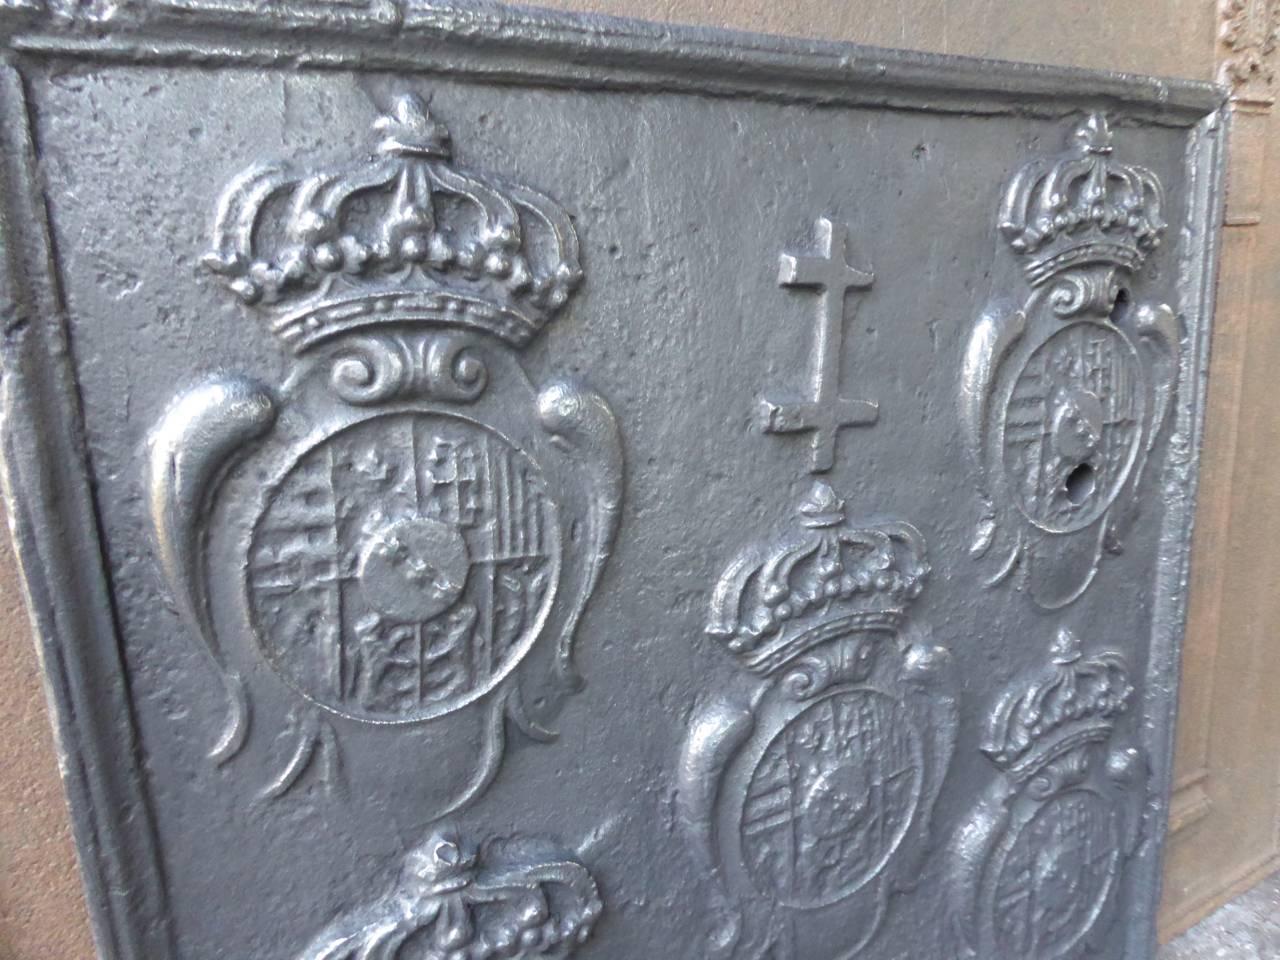 17th-18th century French fireback with the arms of Leopold I, Duke of Lorraine.

We have a unique and specialized collection of antique and used fireplace accessories consisting of more than 1000 listings at 1stdibs. Amongst others, we always have